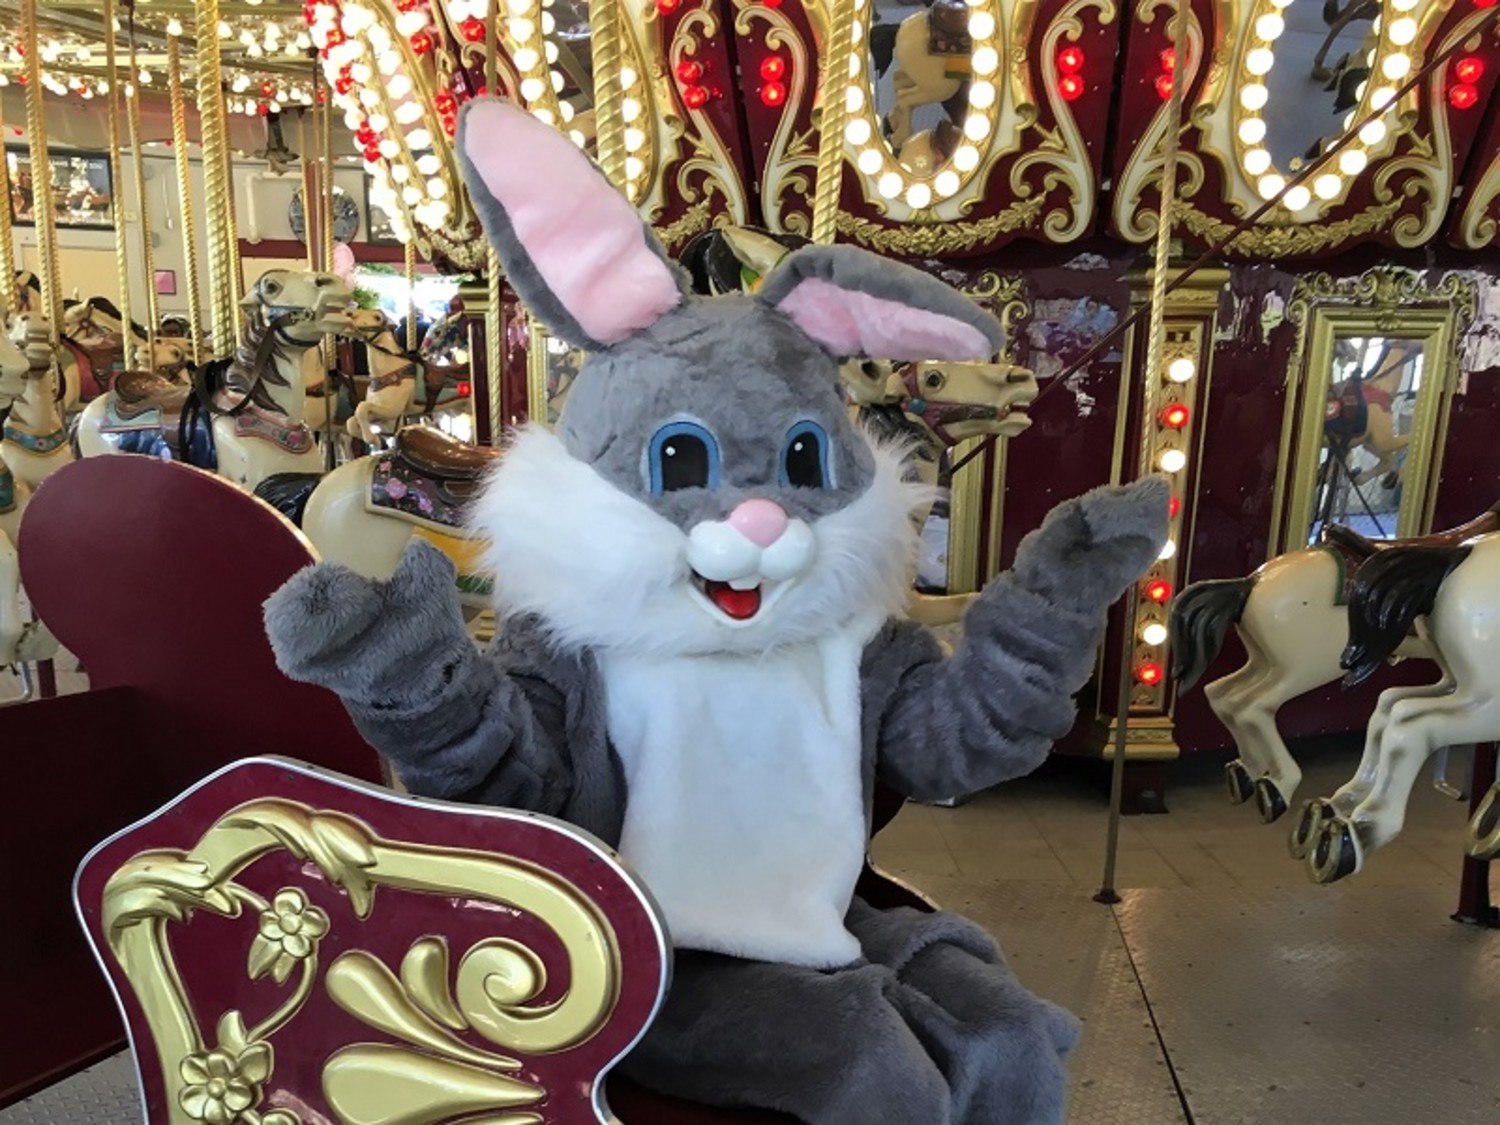 Visit with the Easter Bunny at Carousel Village Providence Media